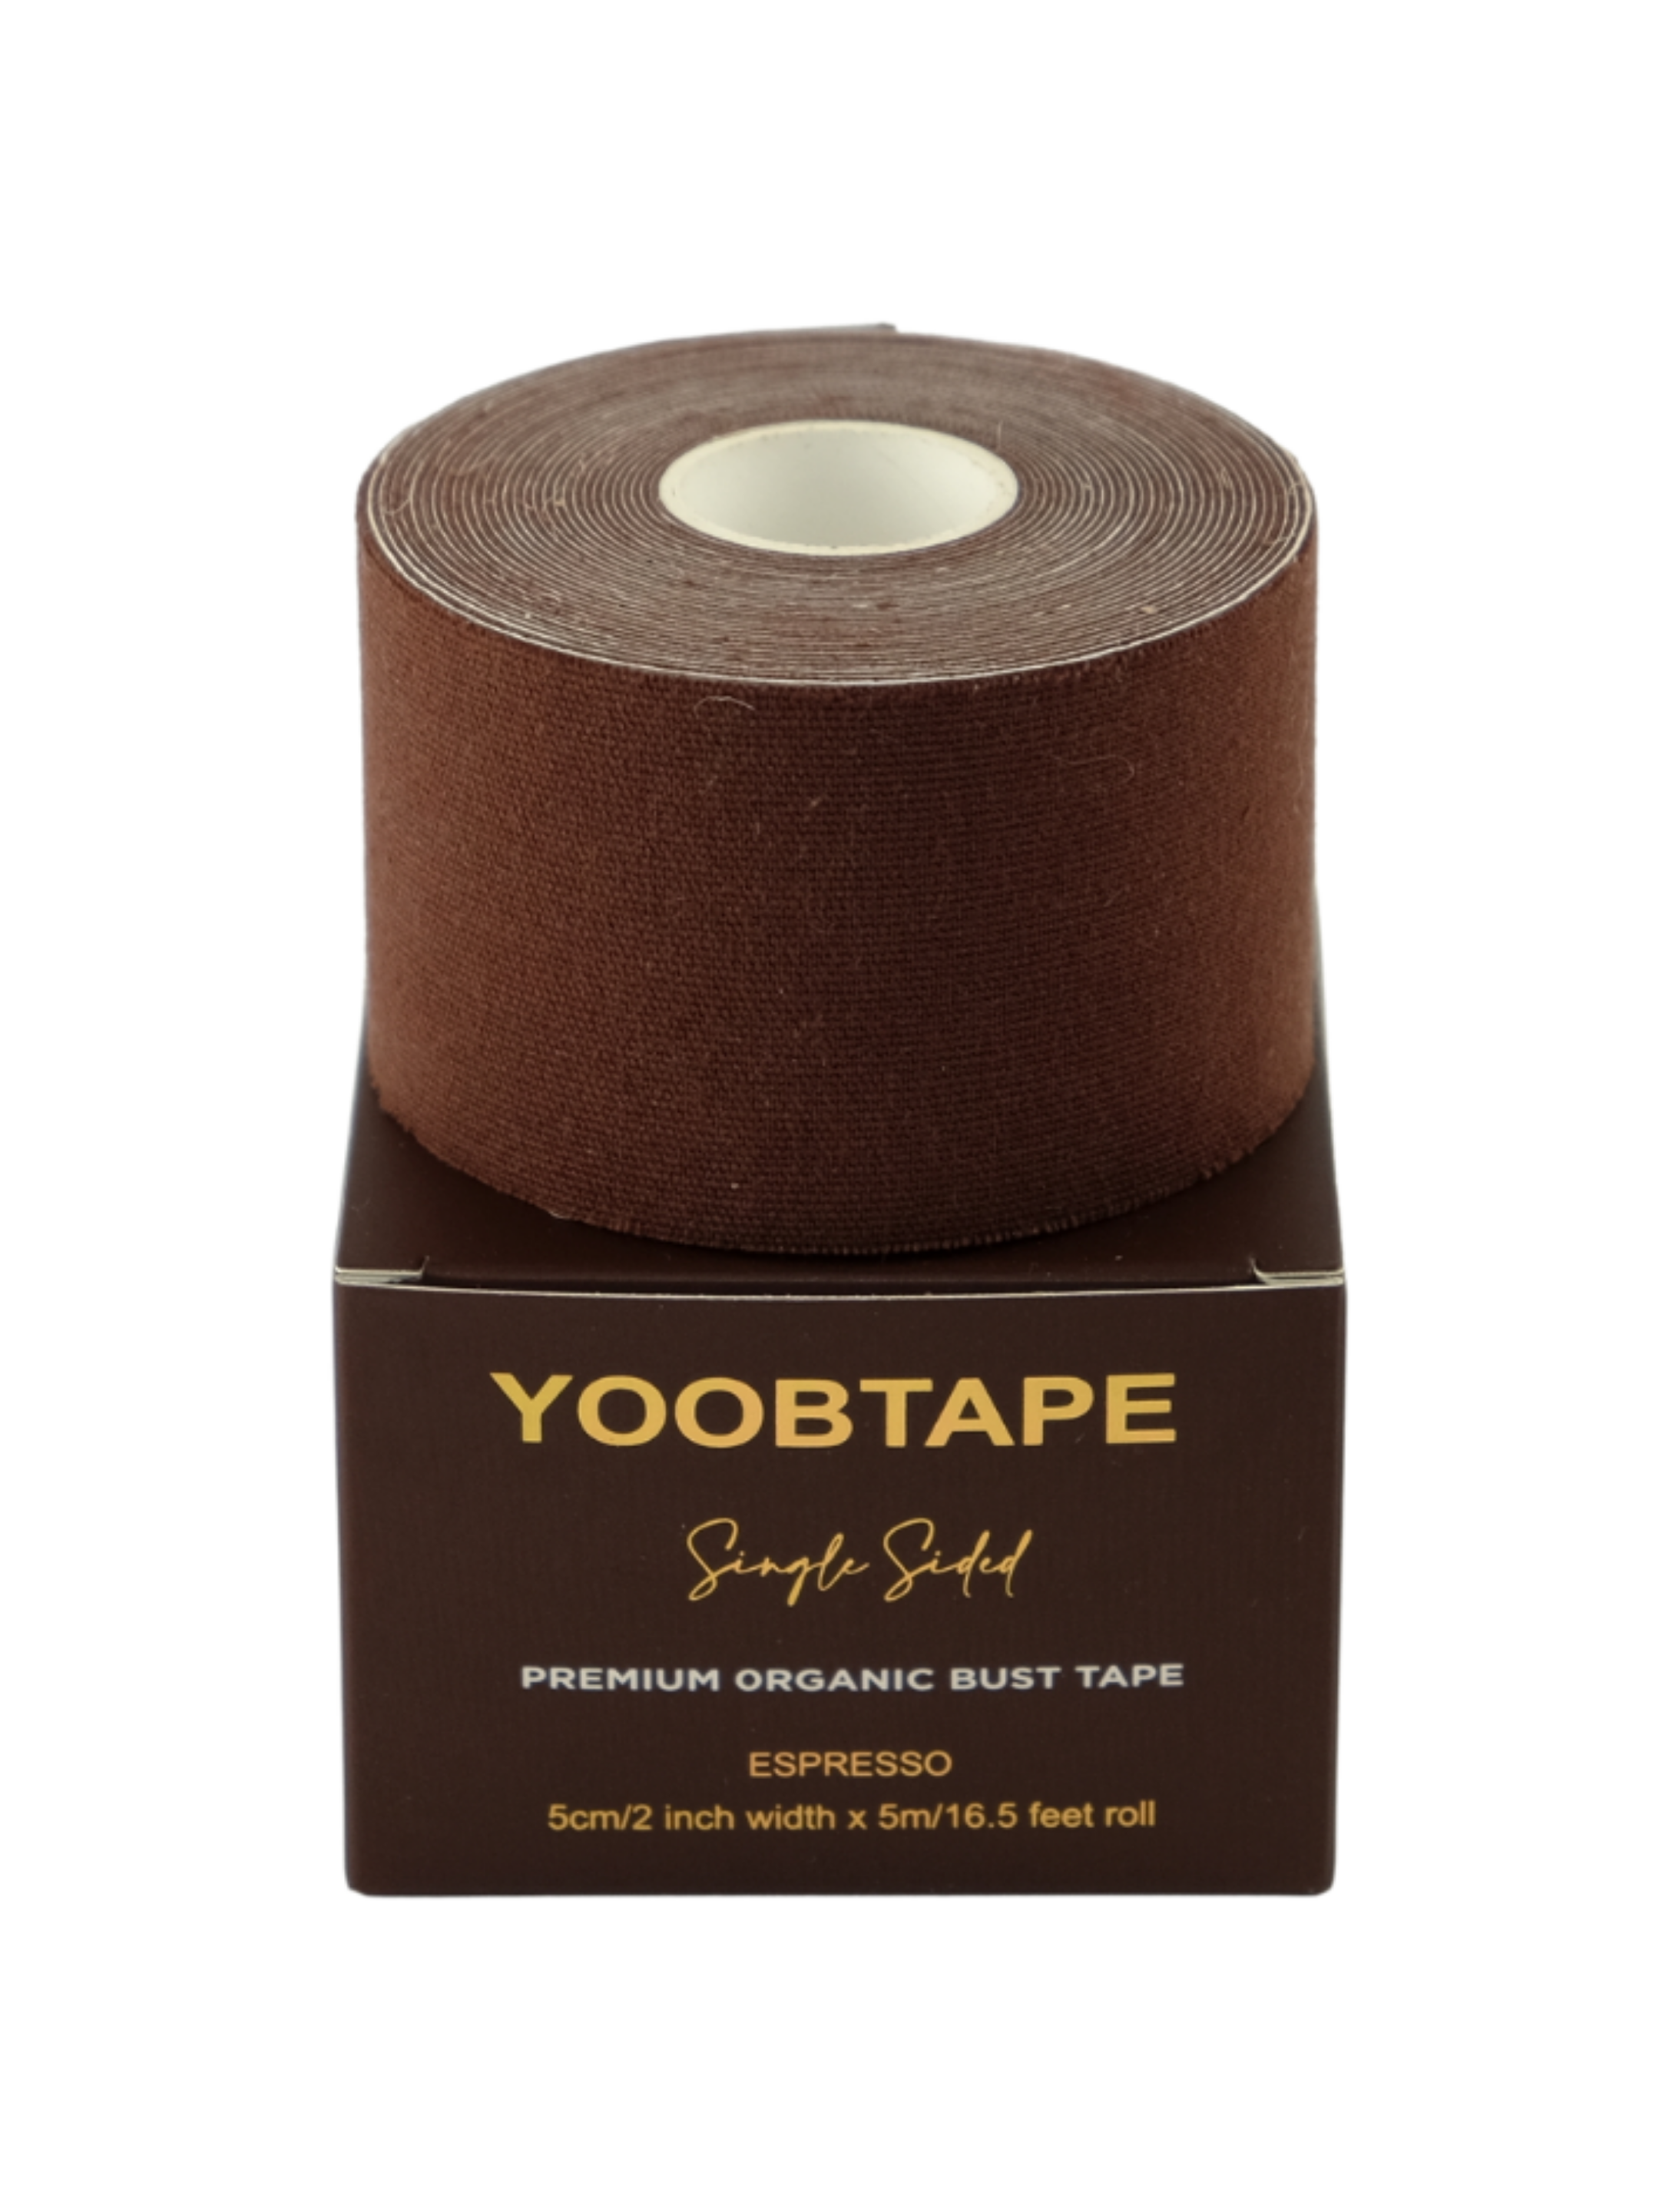 BEST DOUBLE SIDED TAPE. Ft Yoobtape. How to use a double sided